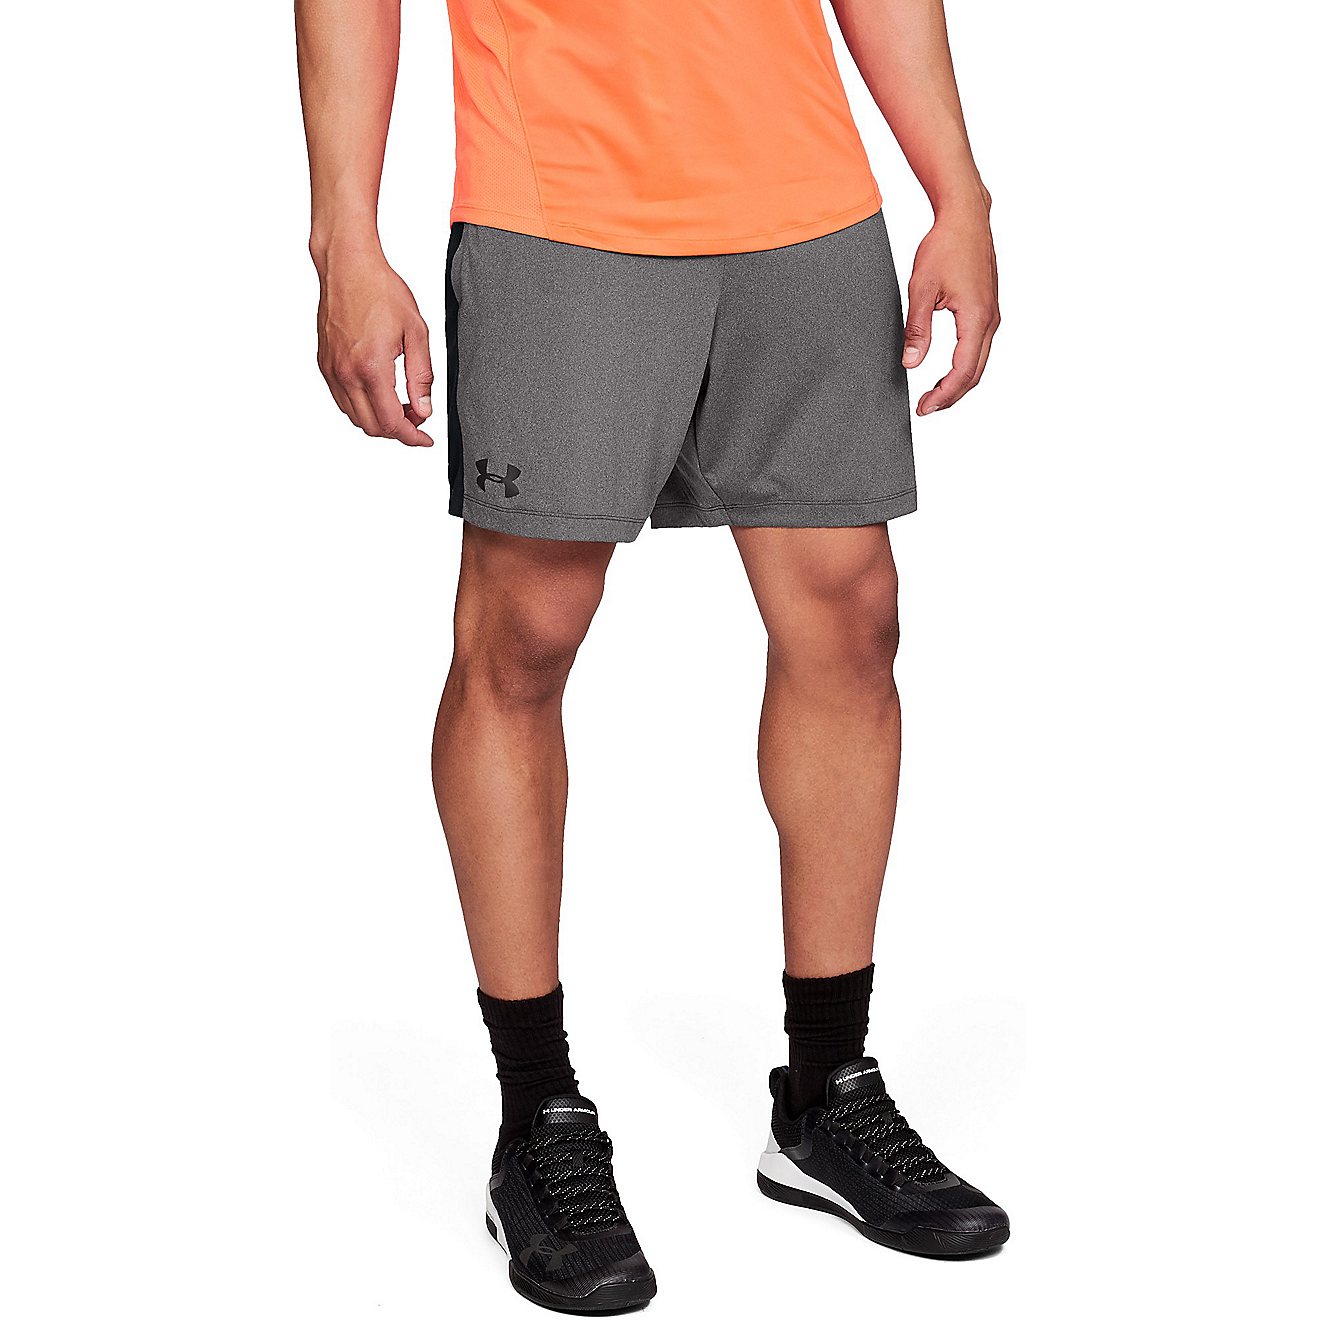 Under Armour Mens MK1 7-Inch Shorts 